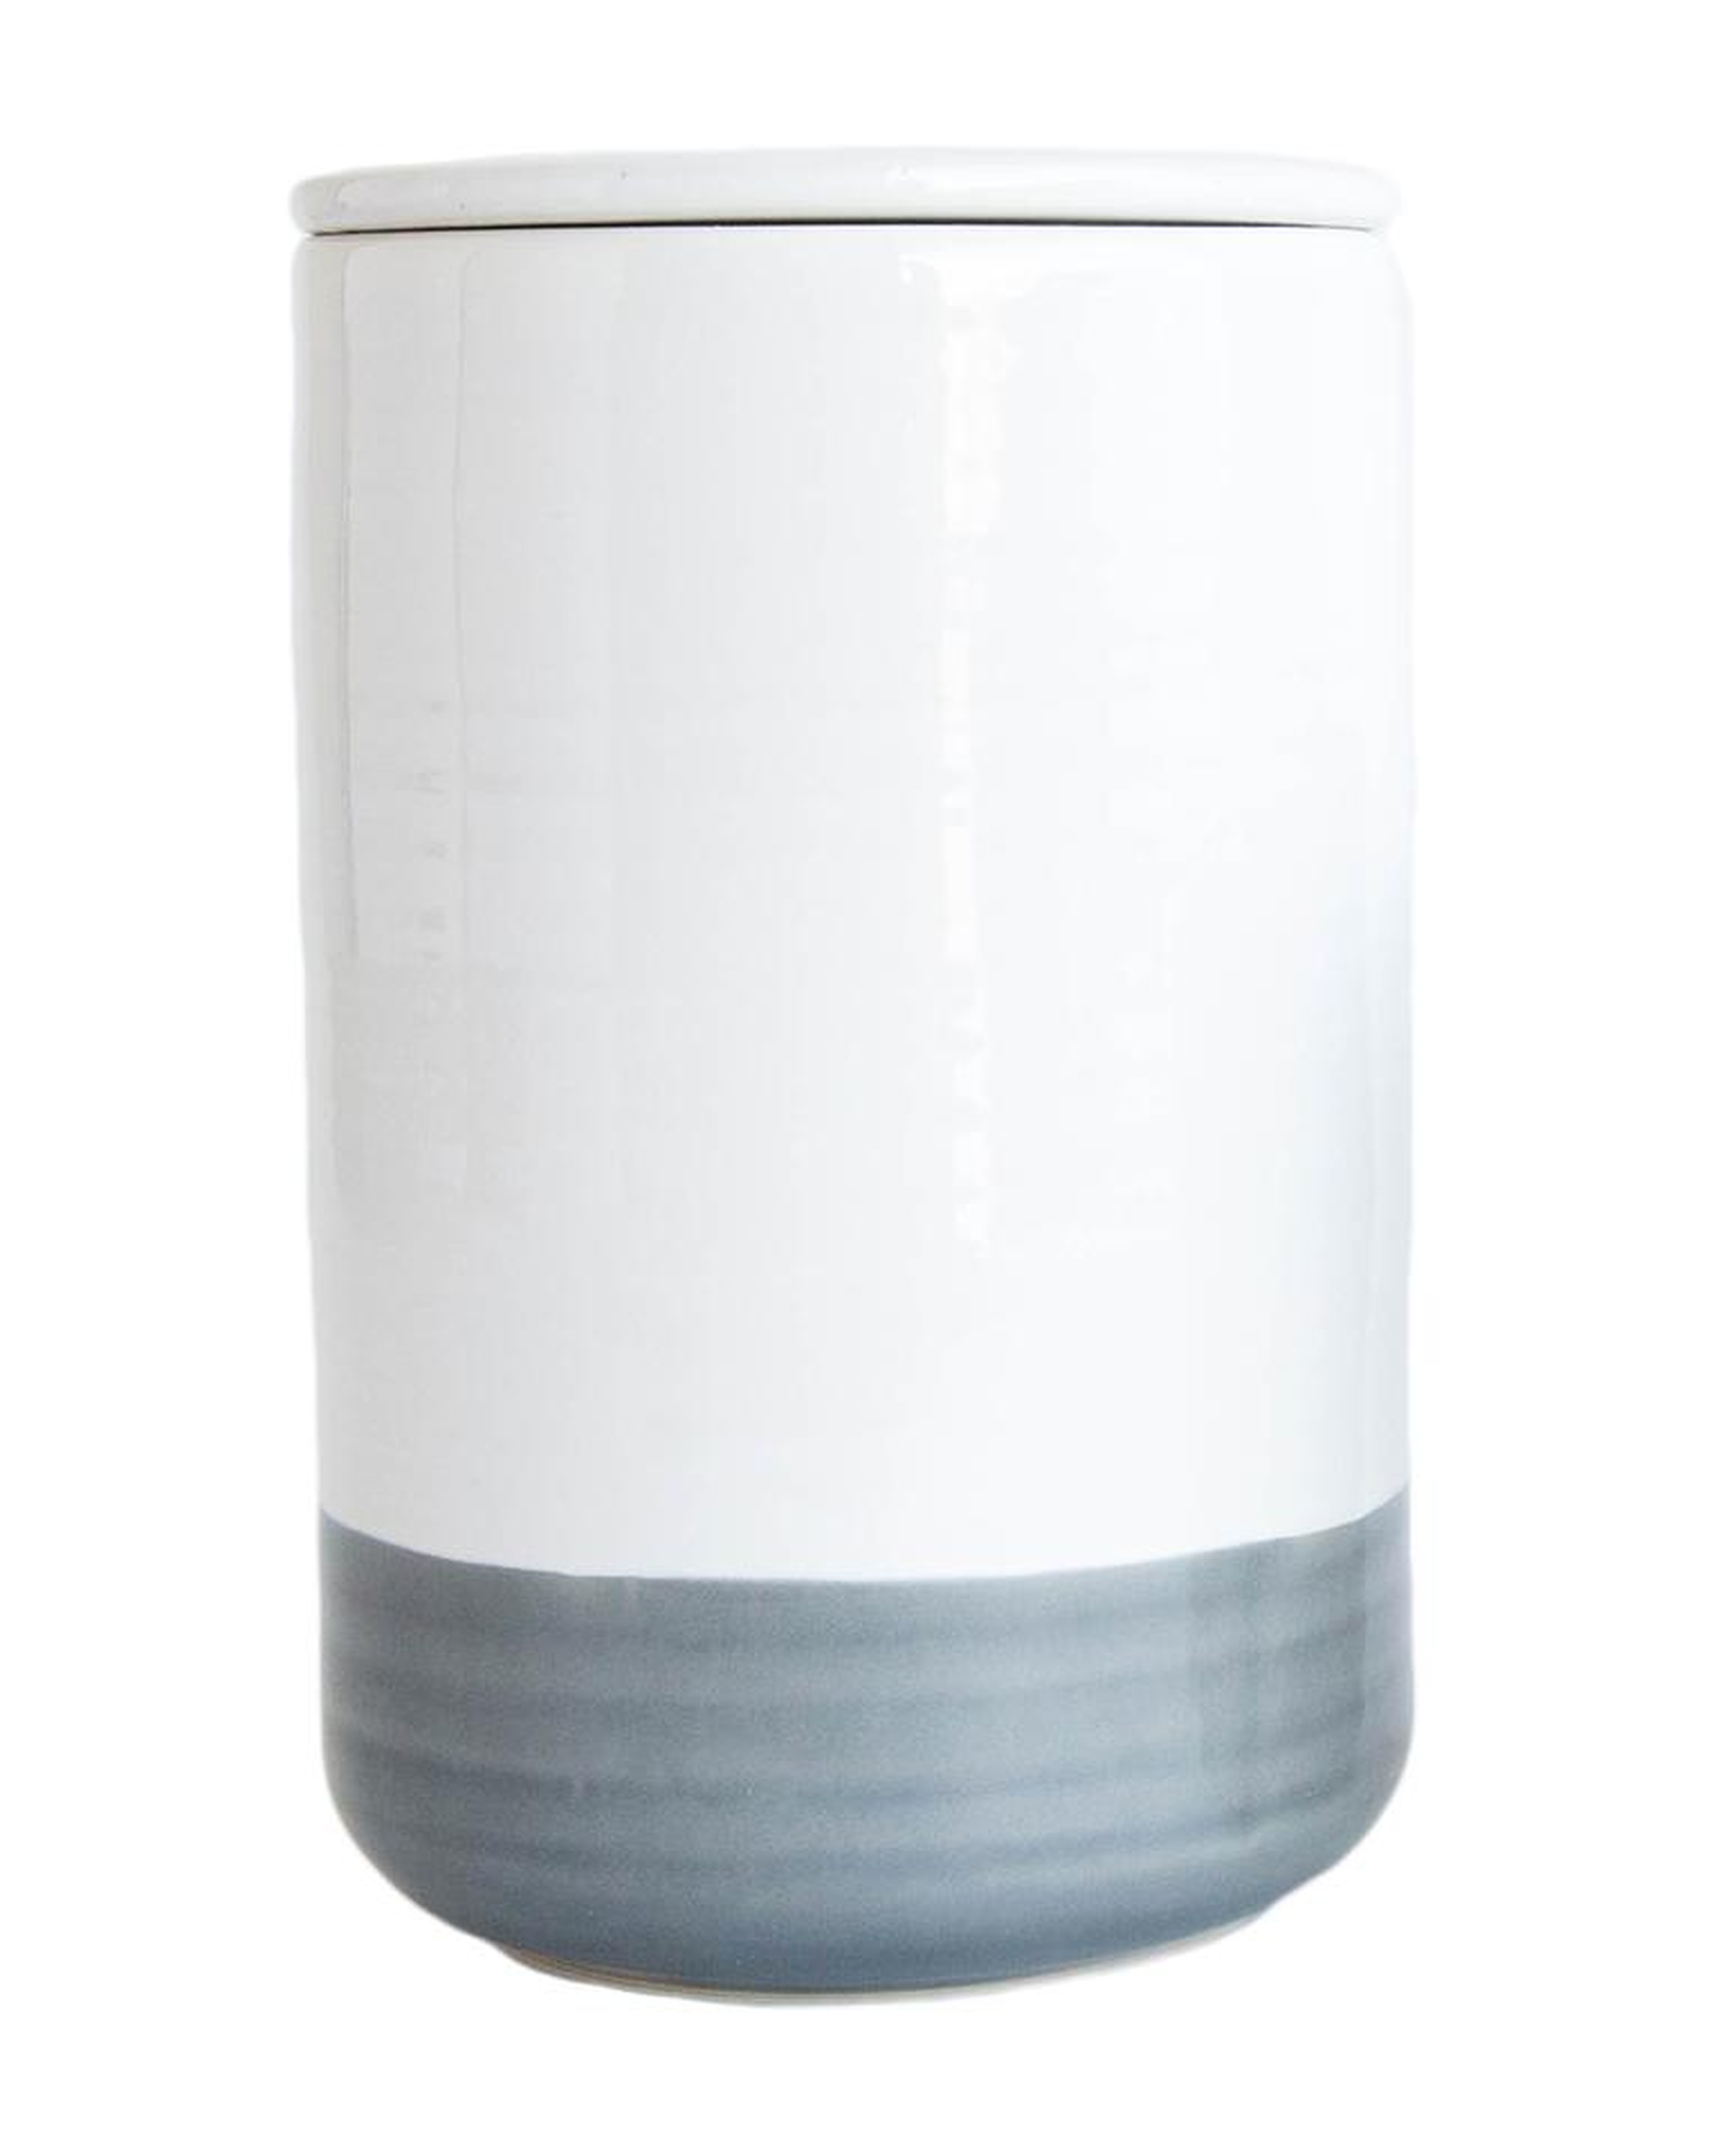 WHITE & GRAY CANISTER, LARGE - McGee & Co.